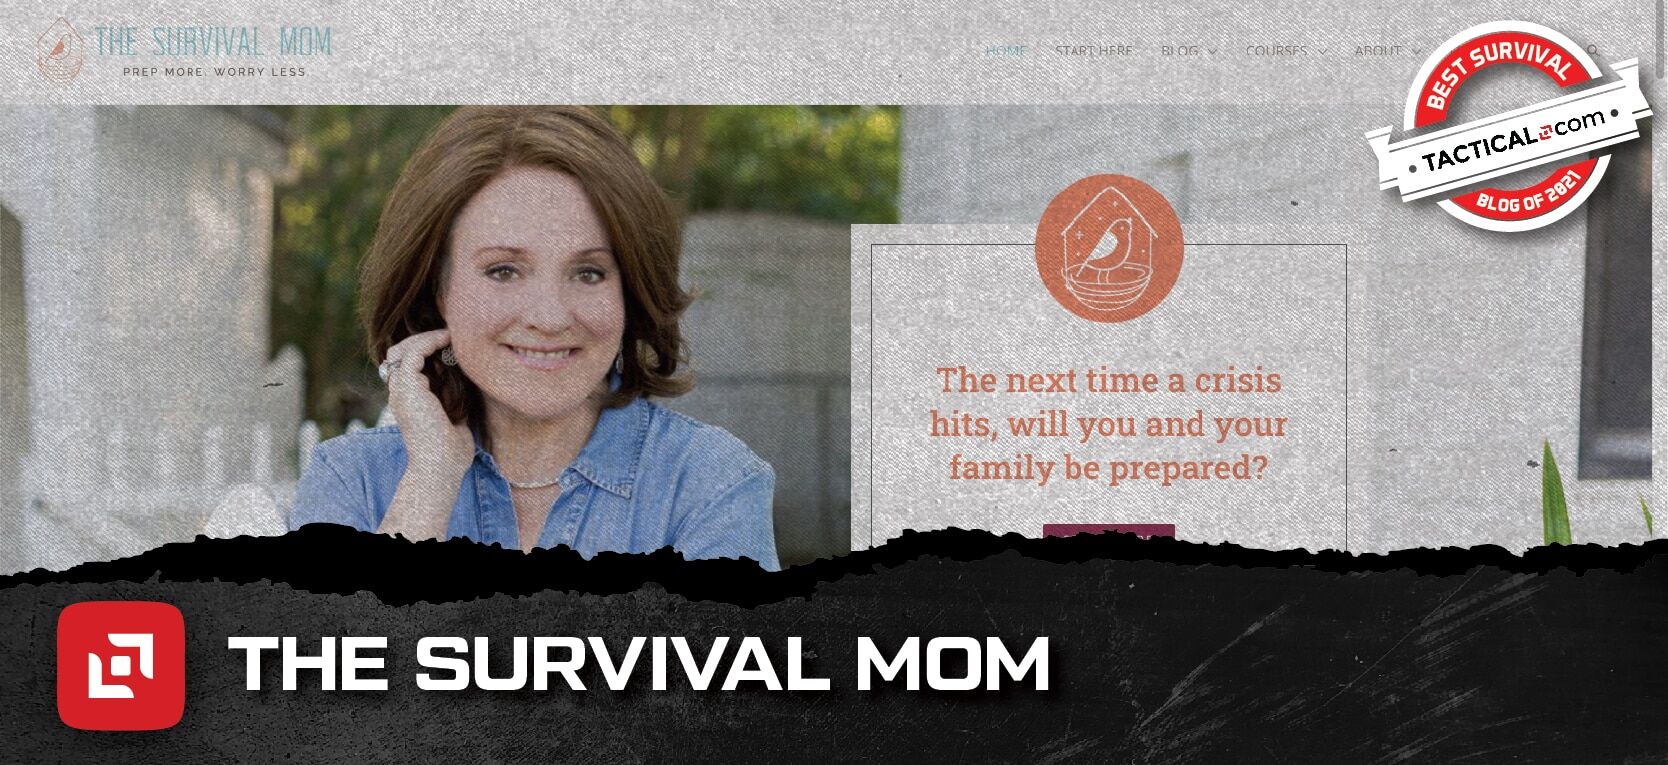 The Survival Mom homepage